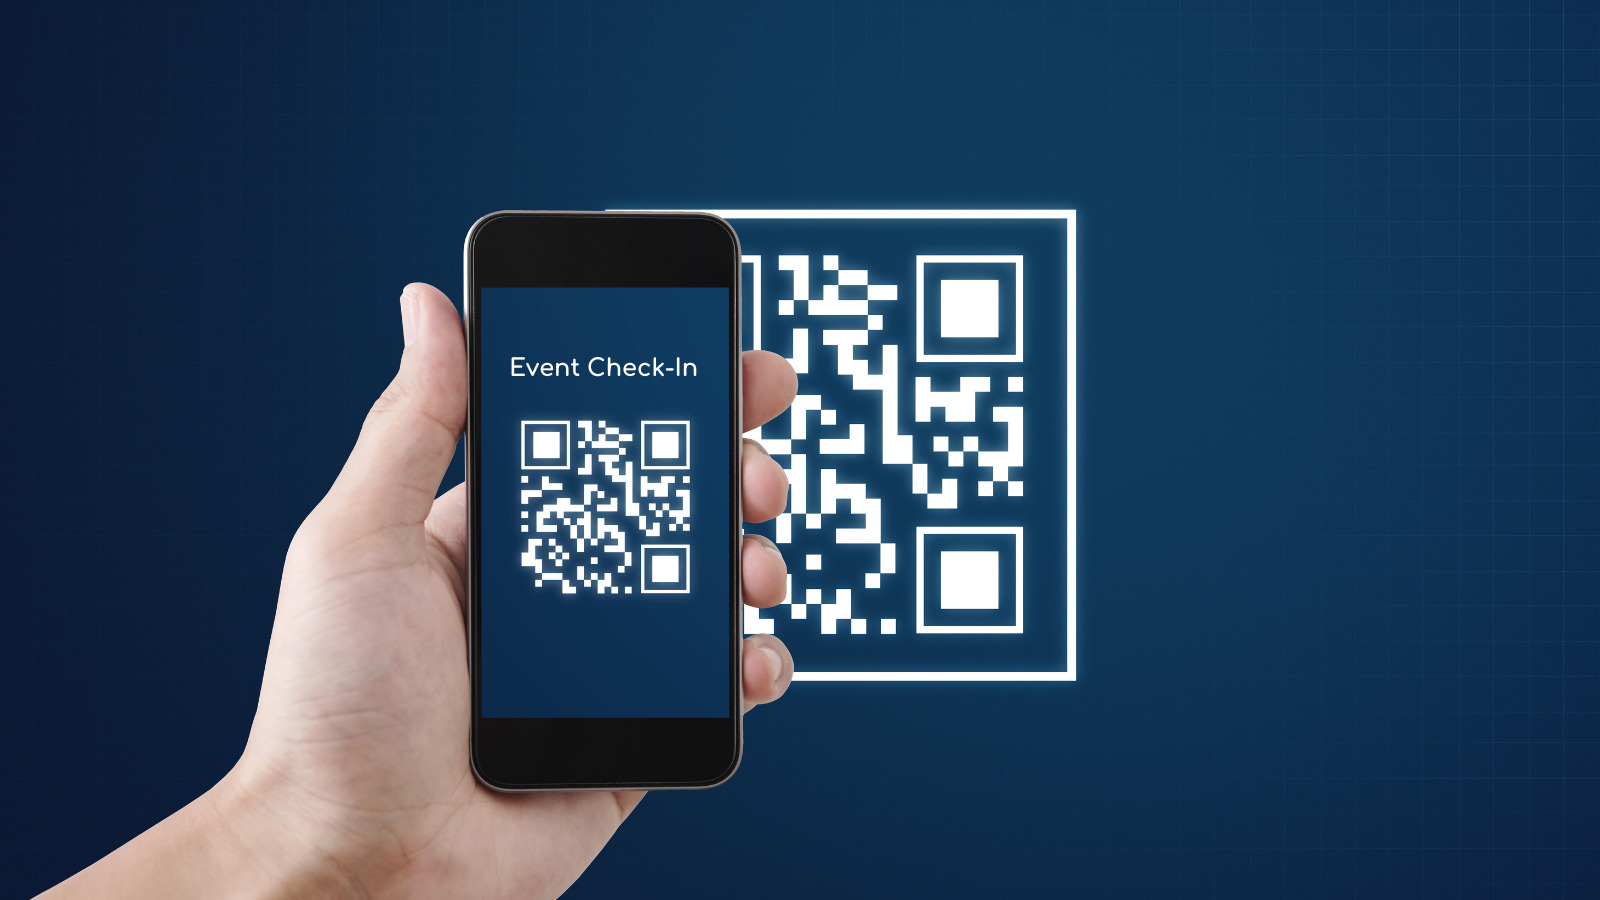 Event Door Management and Paperless Check-Ins